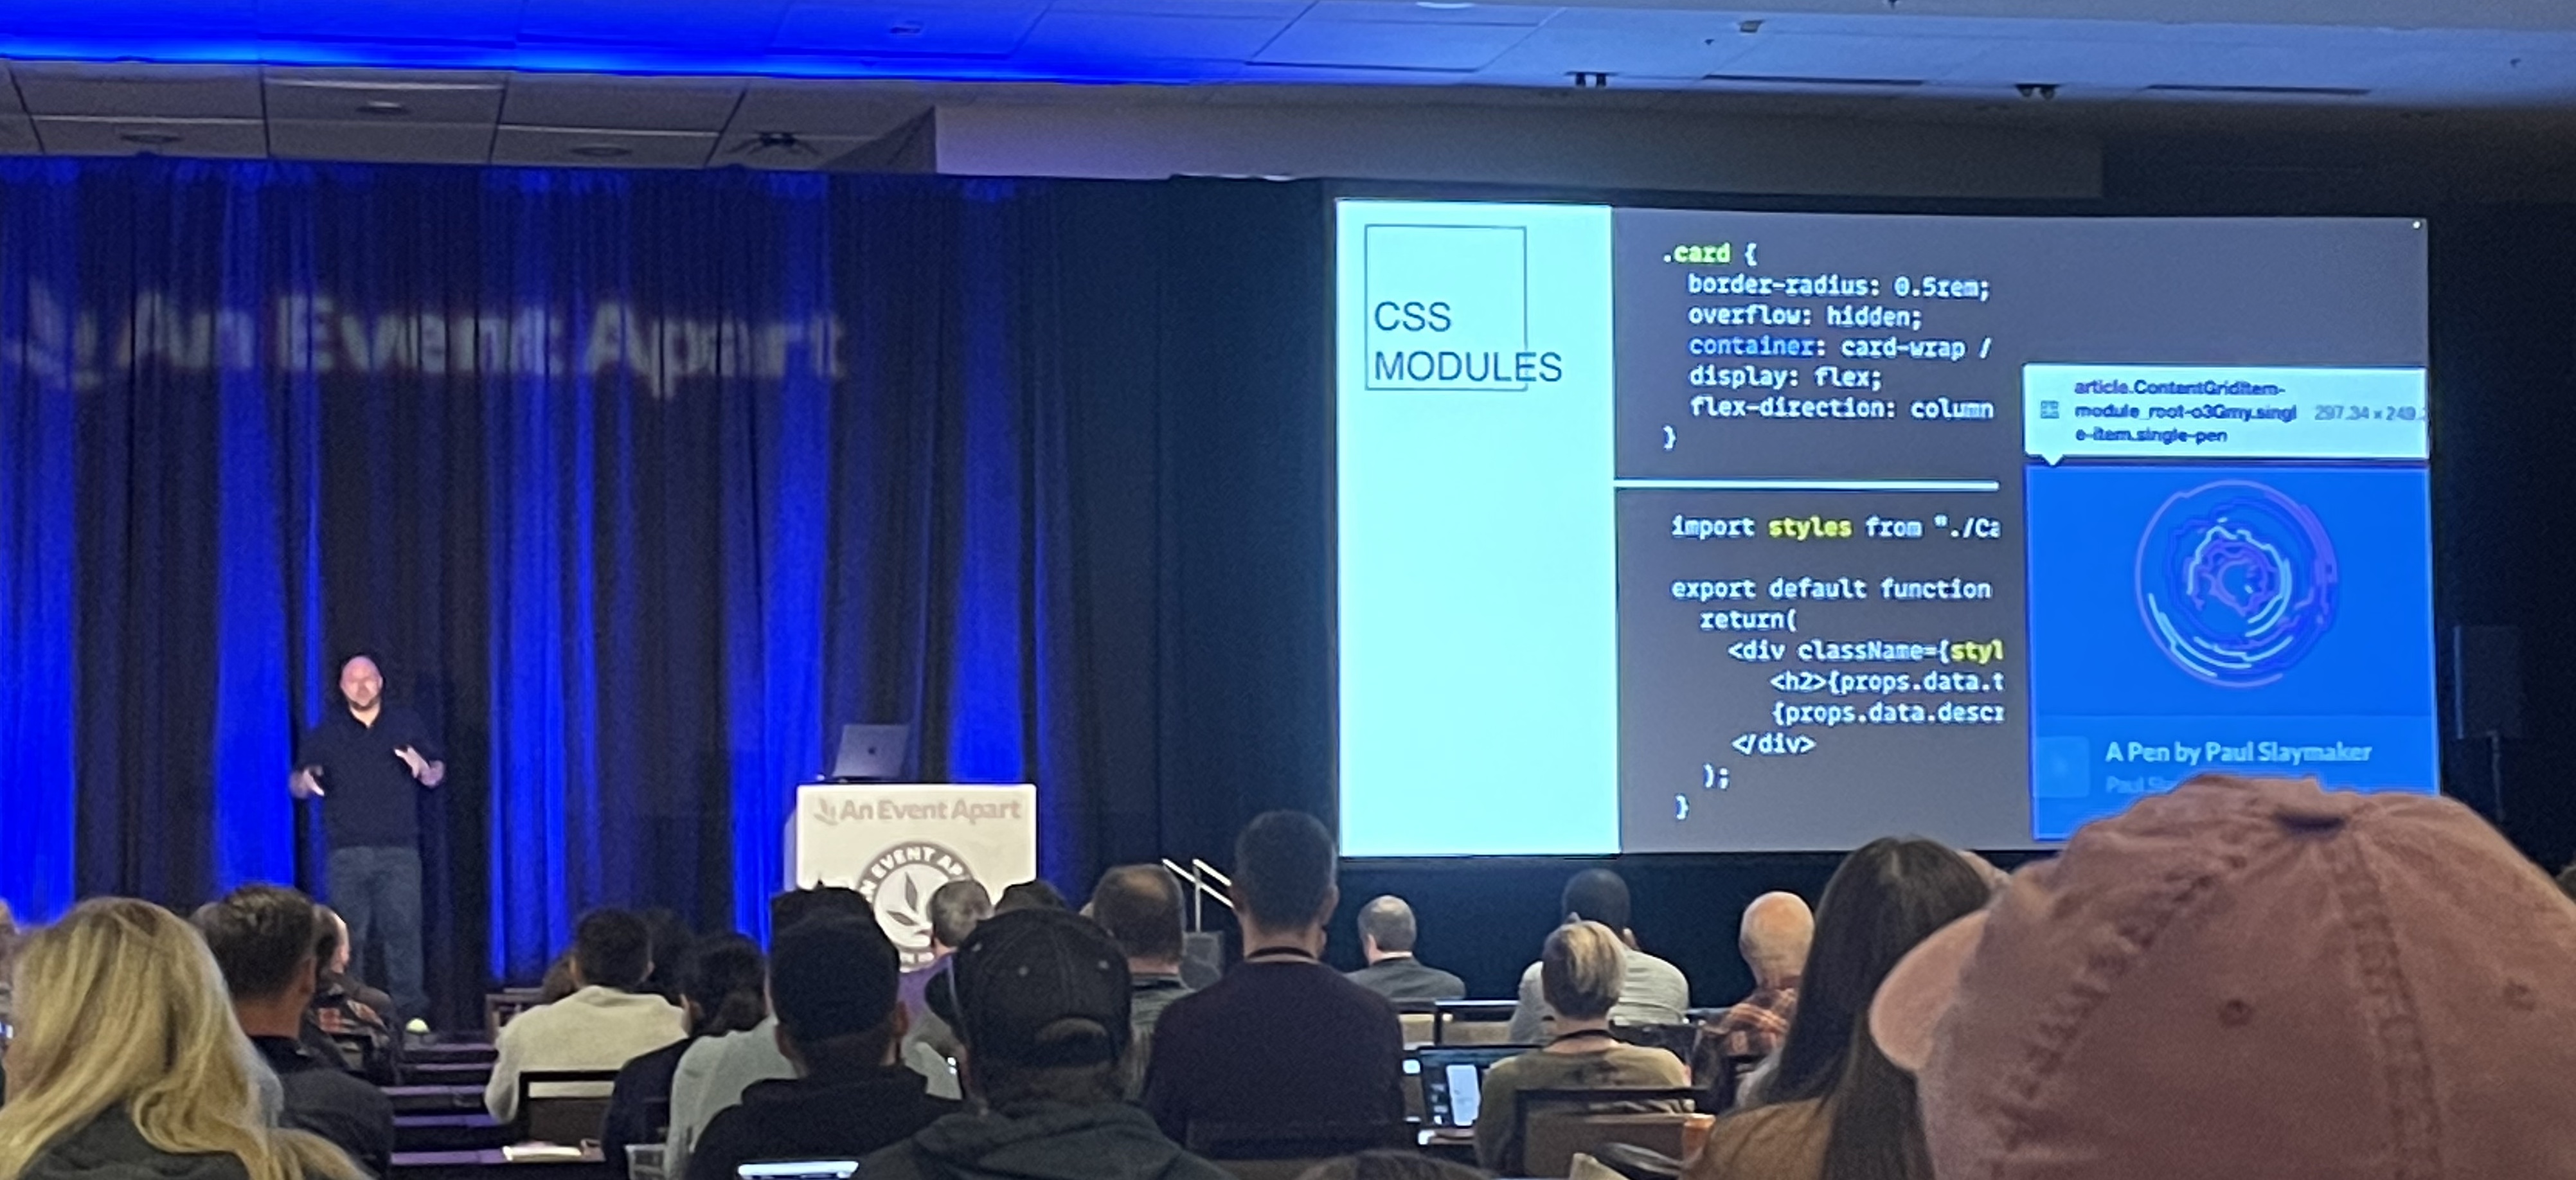 Chris Coyier on stage,
with a slide about CSS Modules
scoping styles
